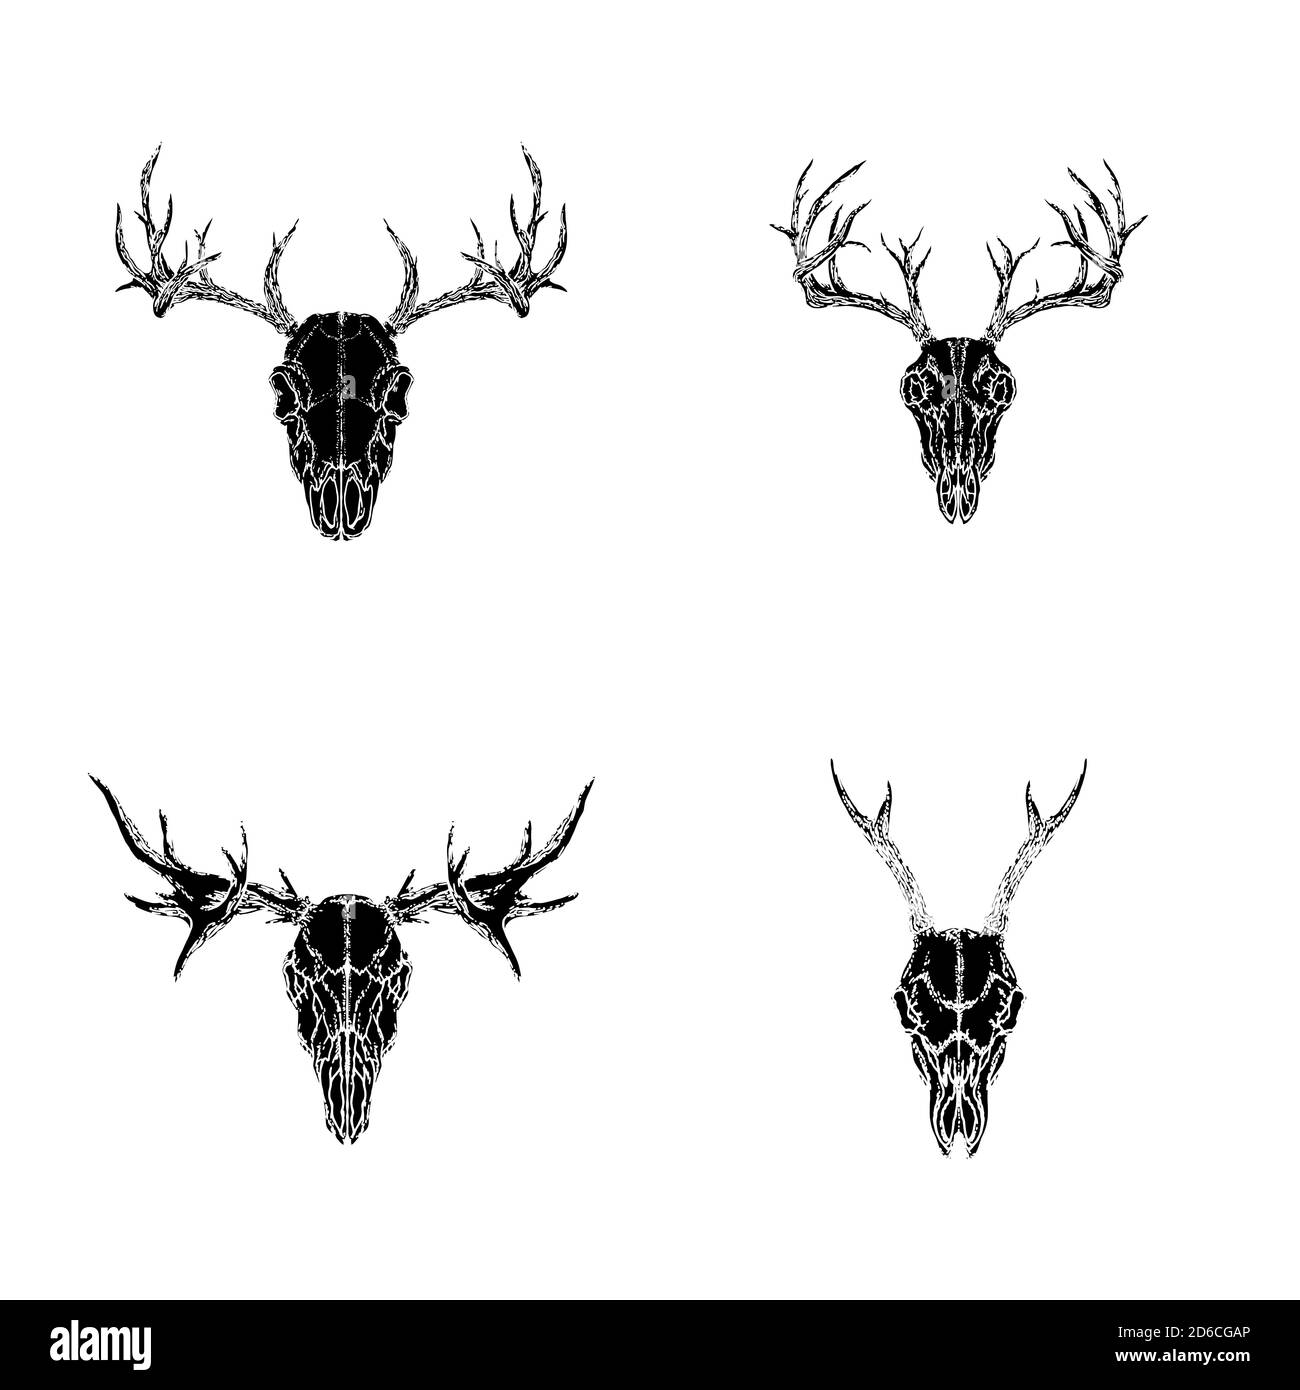 Stag head tattoo Black and White Stock Photos & Images - Alamy